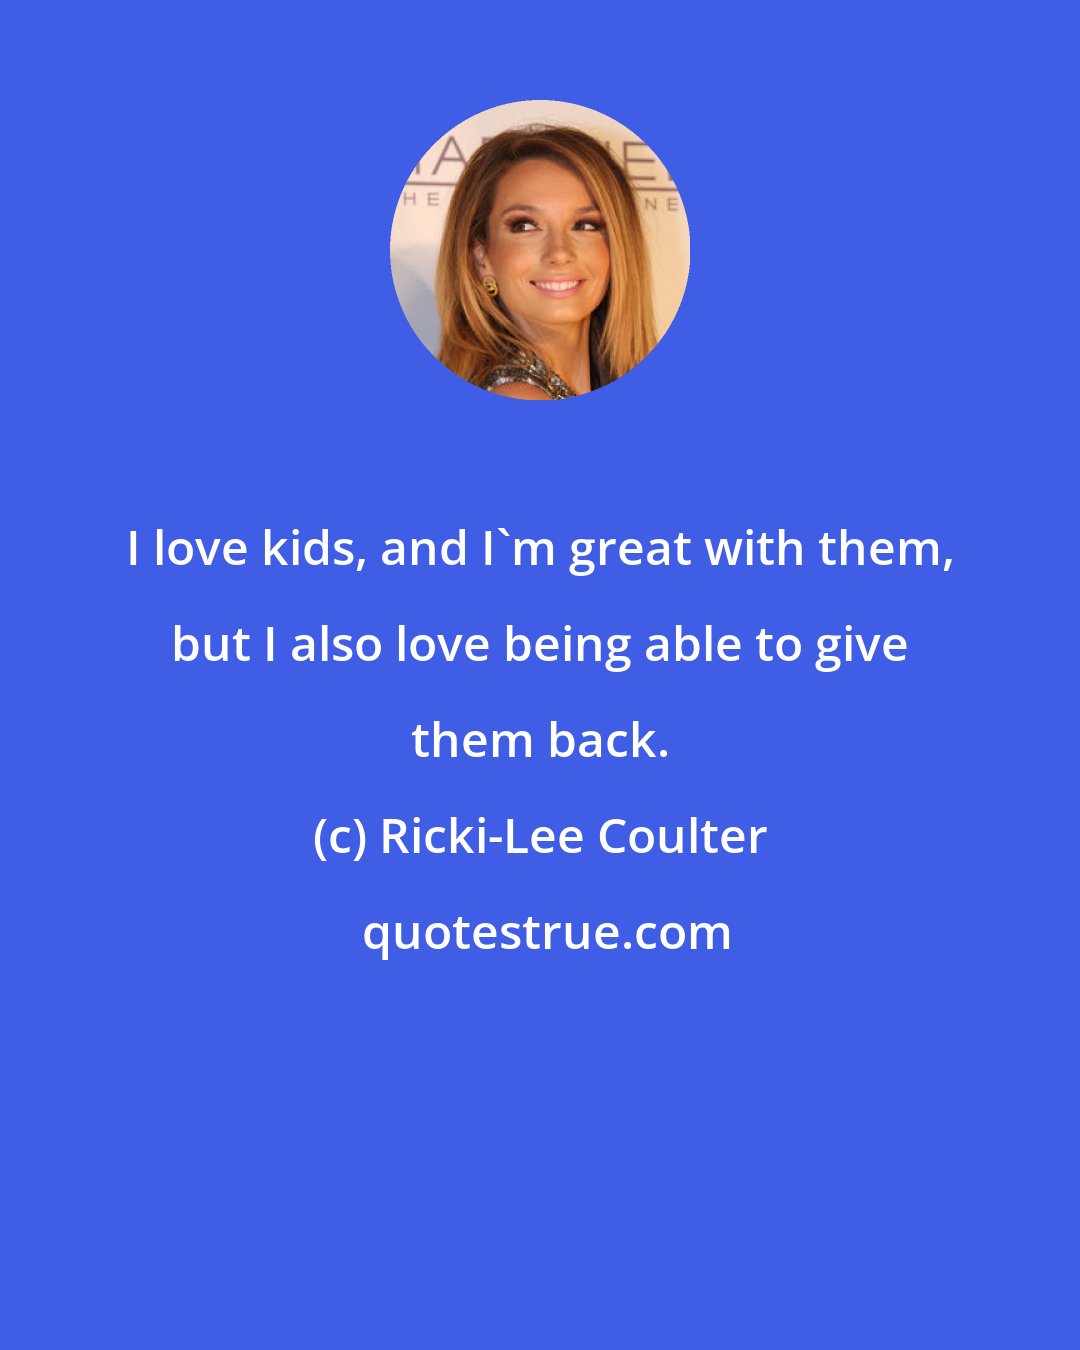 Ricki-Lee Coulter: I love kids, and I'm great with them, but I also love being able to give them back.